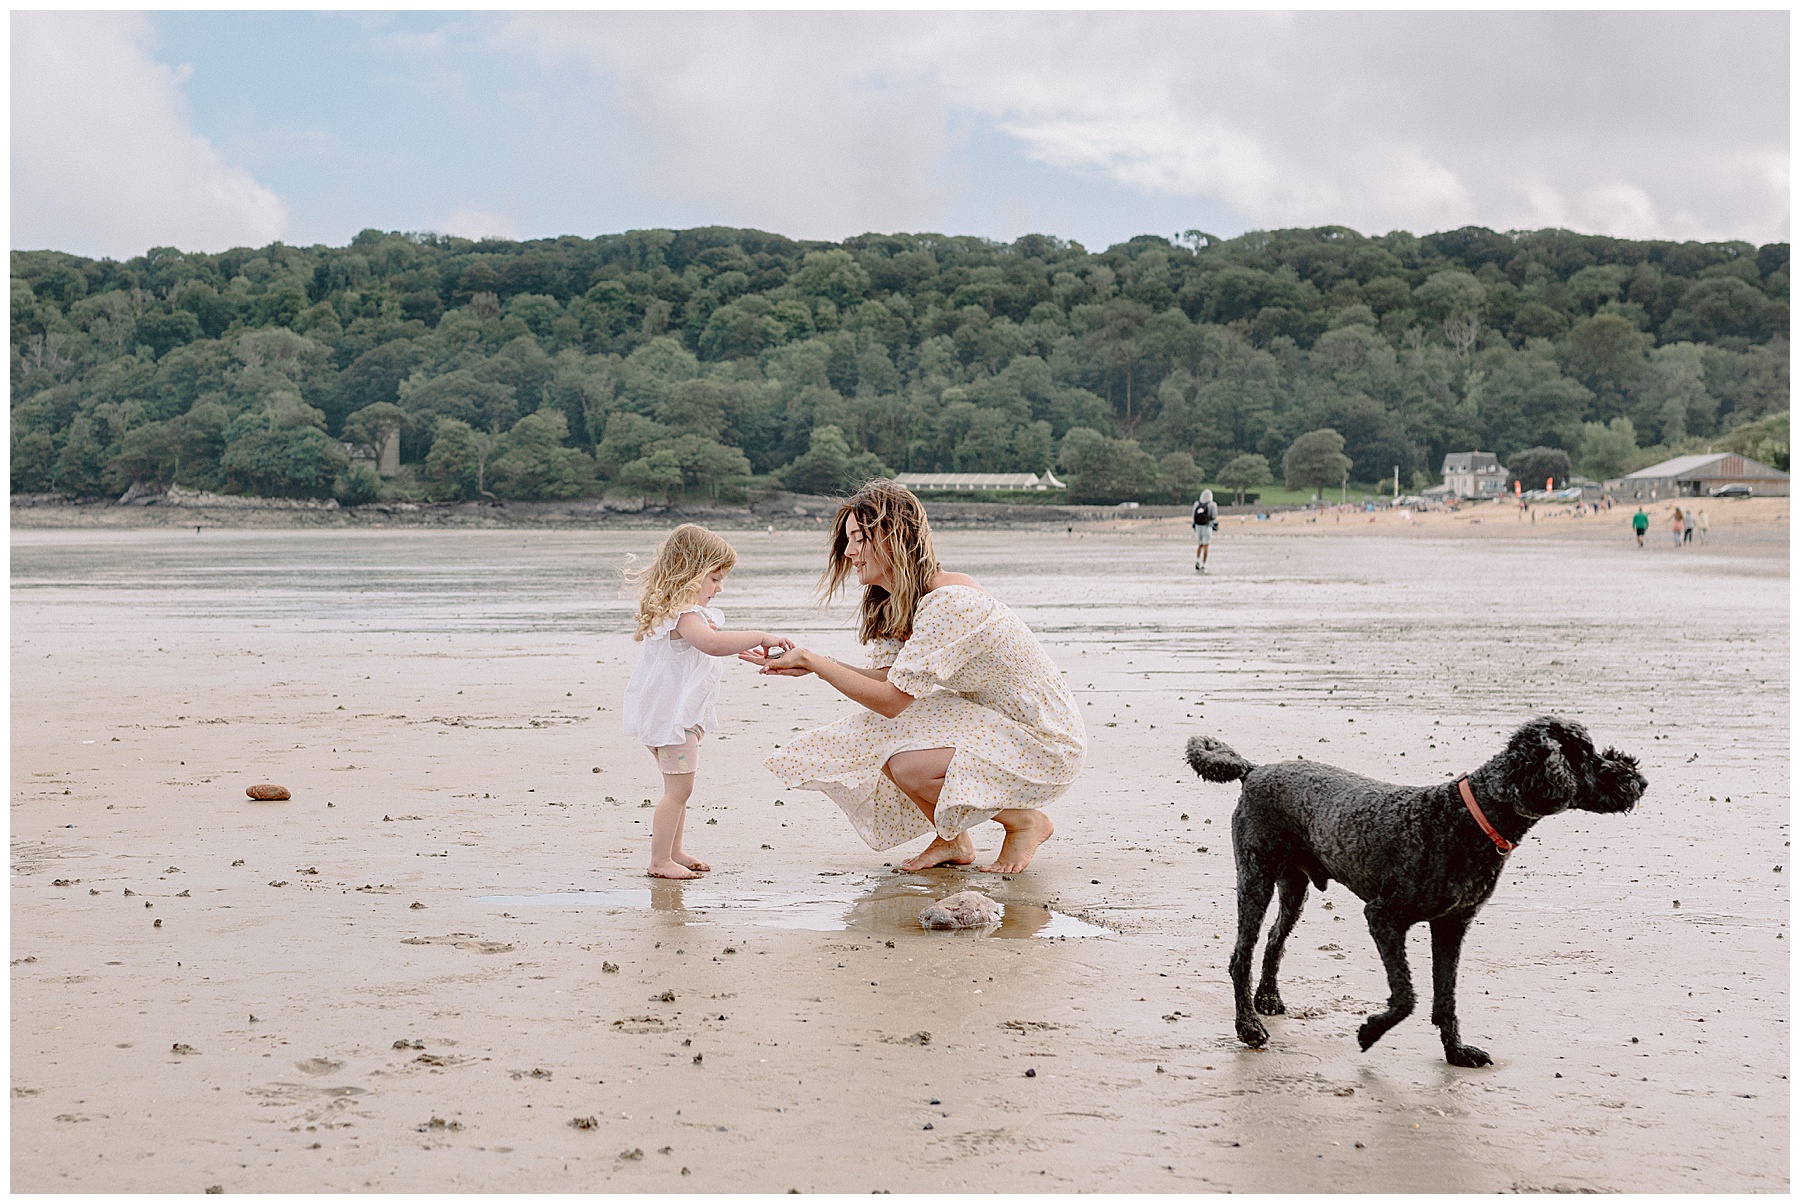 Engagement Photos at Oxwich Bay Gower